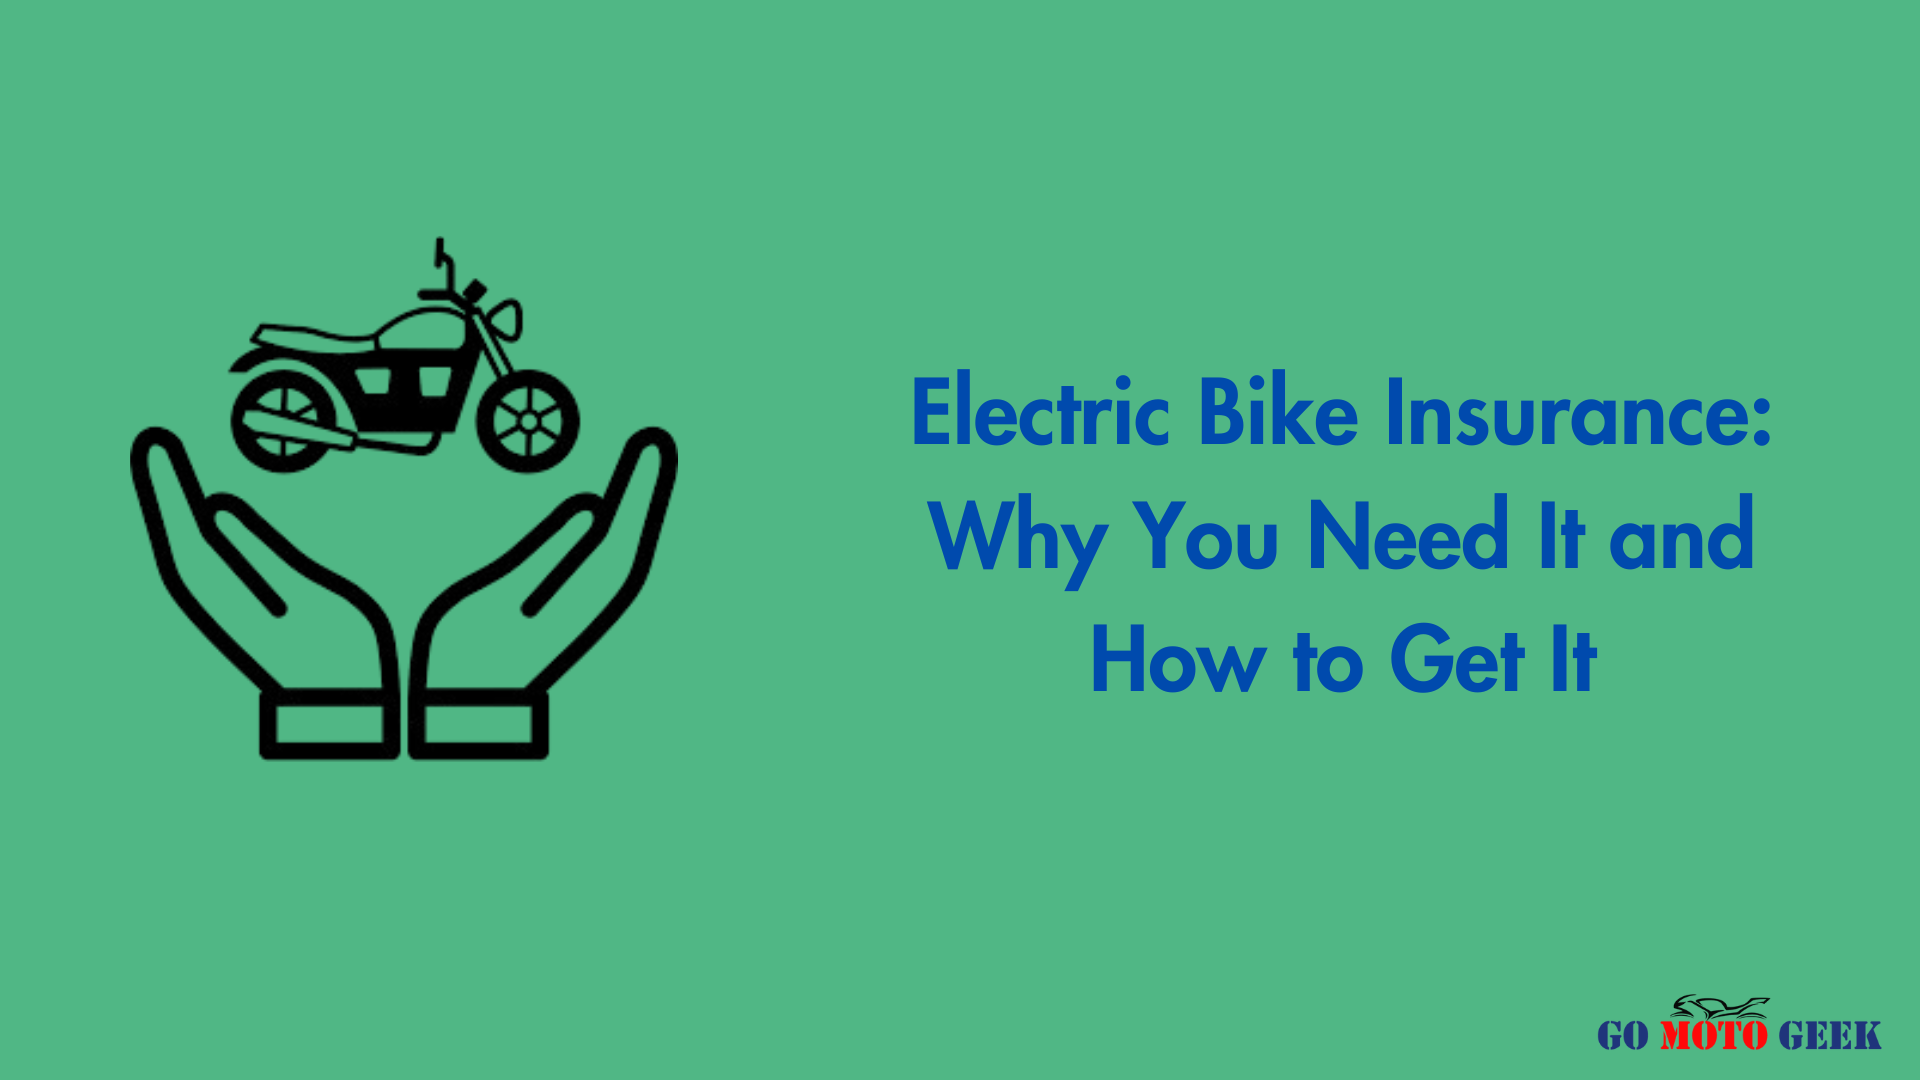 Electric Bike Insurance: Why You Need It and How to Get It